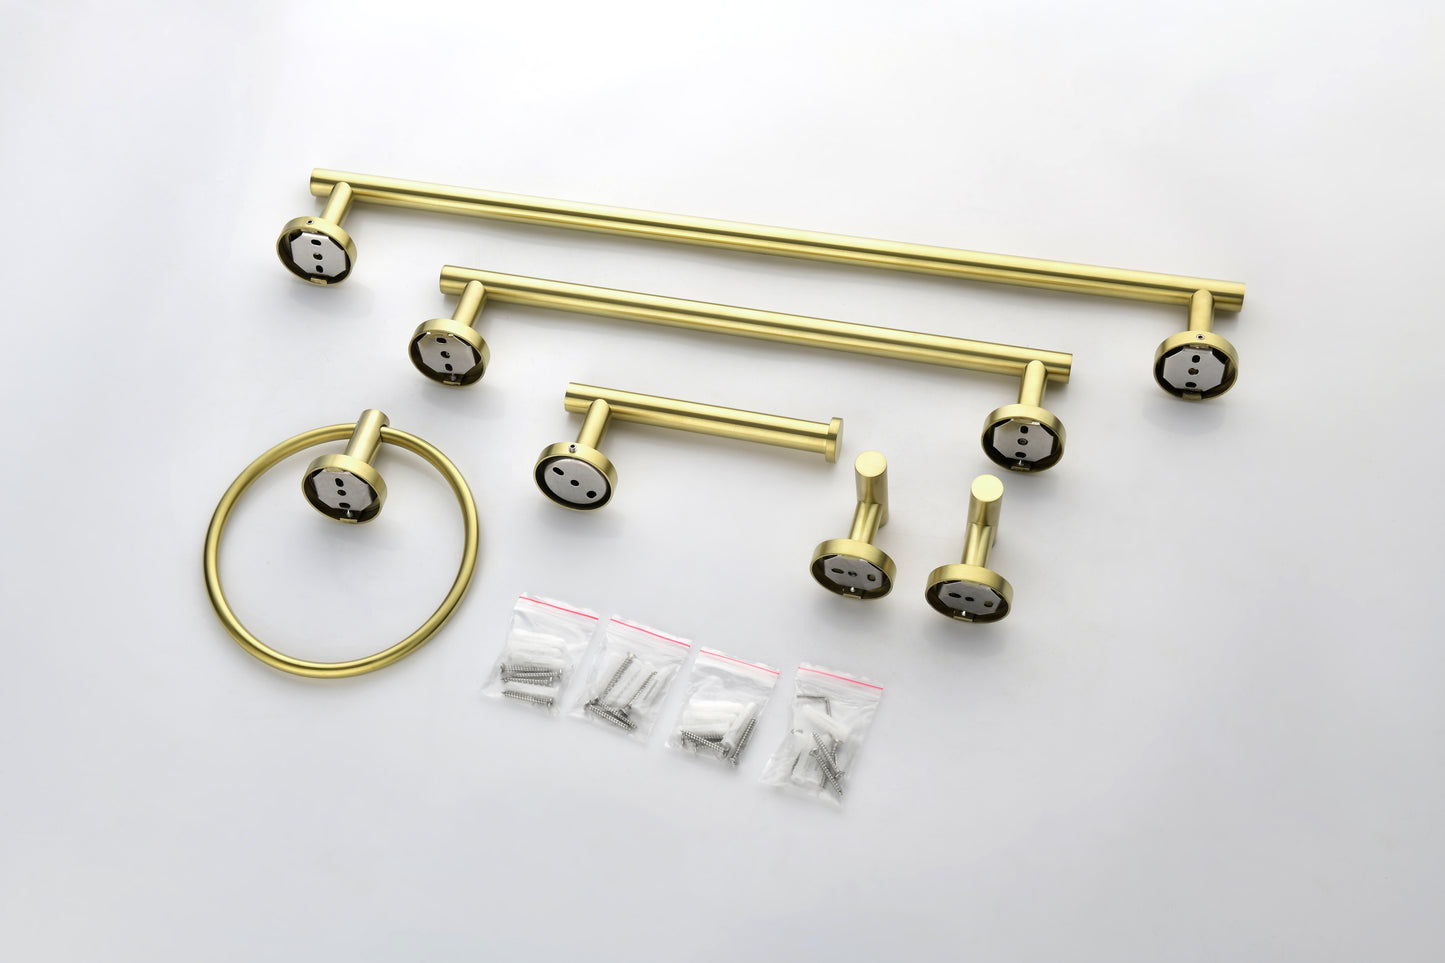 6-Pieces Brushed Gold Bathroom Hardware Set SUS304 Stainless Steel Round Wall Mounted Includes Hand Towel Bar, Toilet Paper Holder, Robe Towel Hooks, Bathroom Accessories Kit